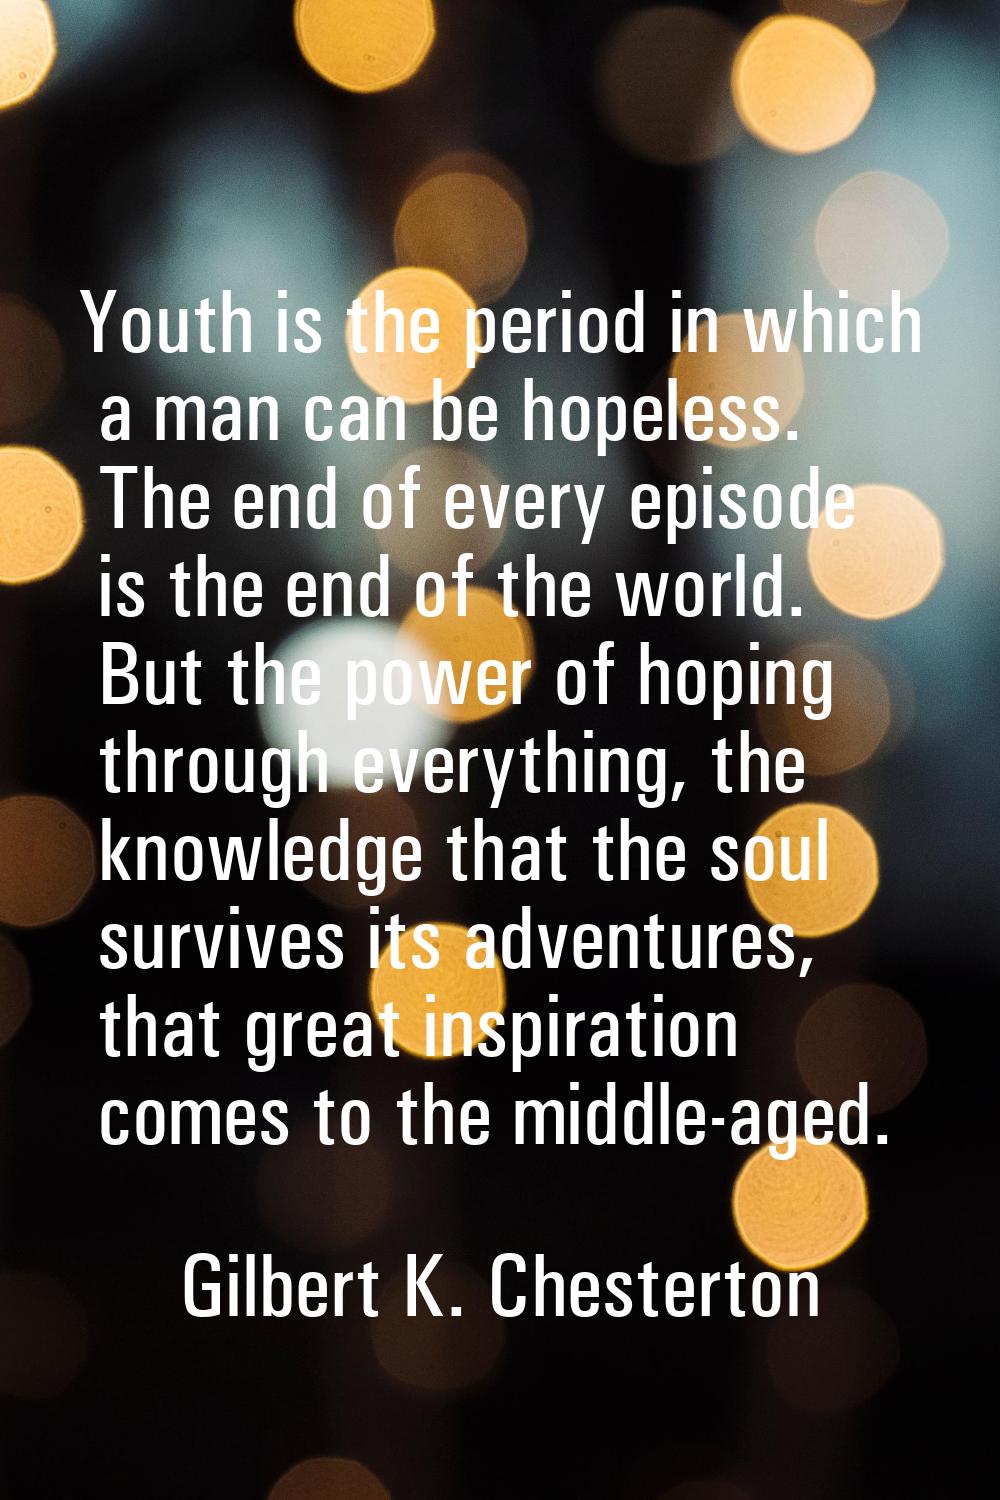 Youth is the period in which a man can be hopeless. The end of every episode is the end of the worl